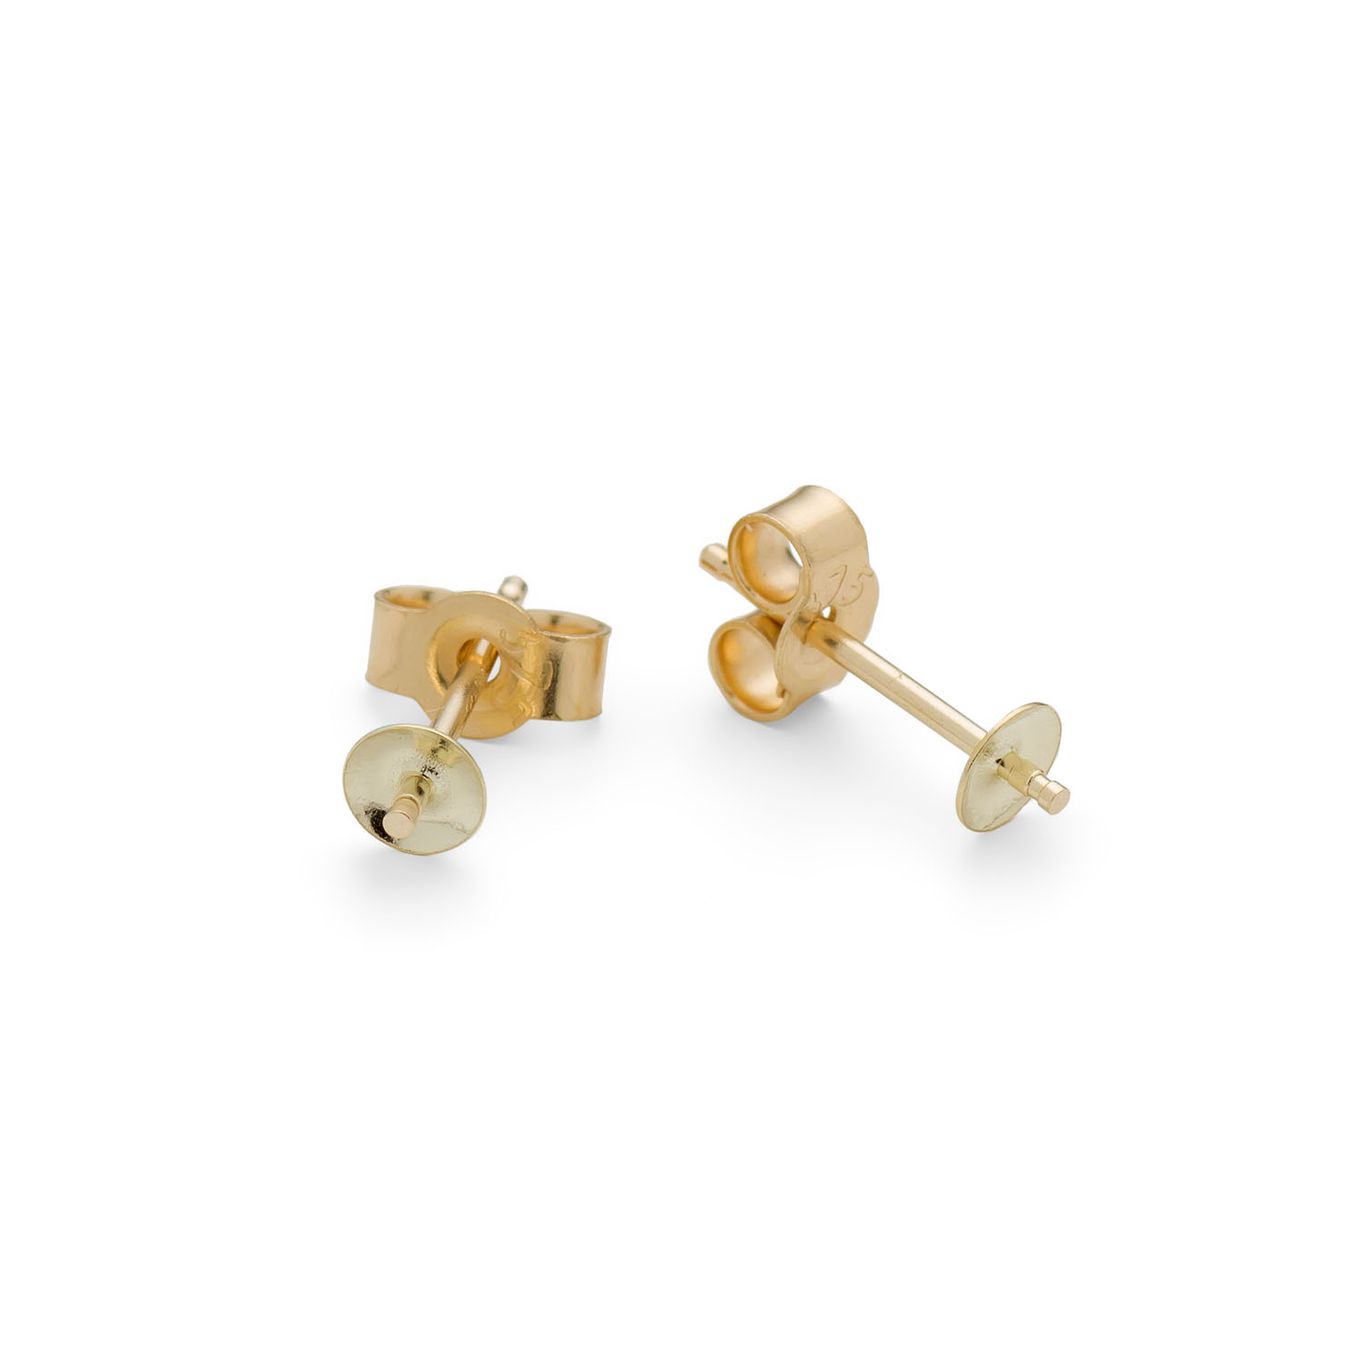 9ct Gold Earstud Settings for Half Drilled Beads (Pair)